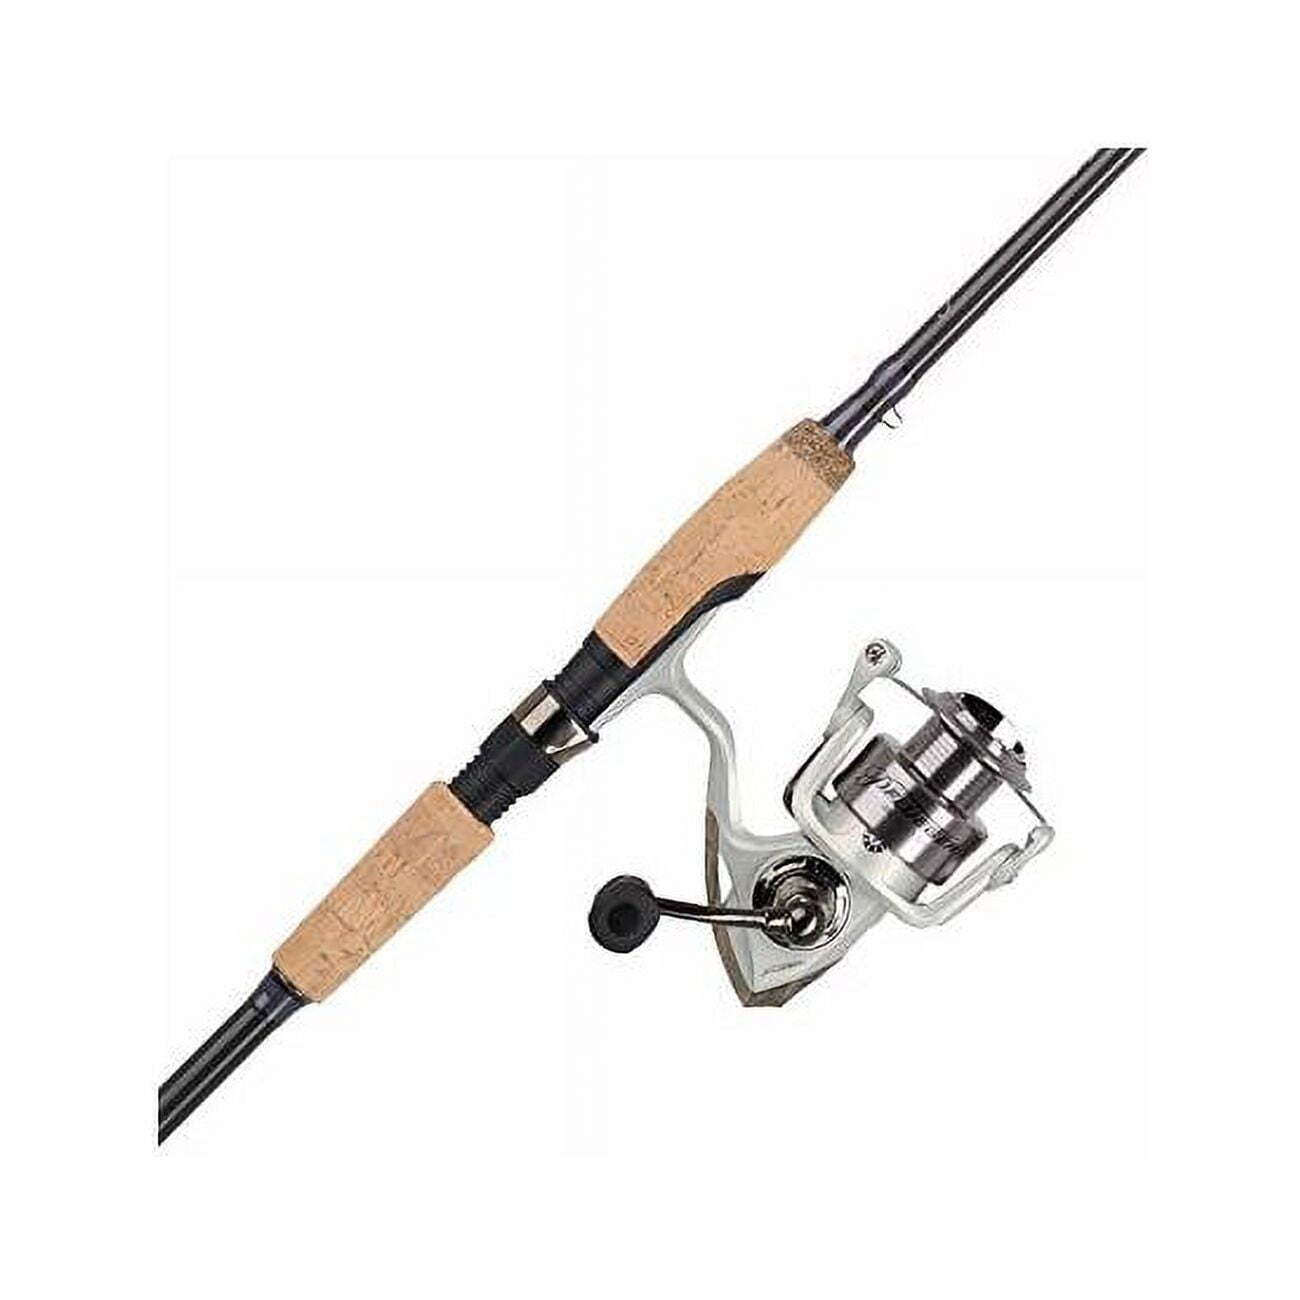 Pflueger 5'6" Trion Spinning Rod and Reel Combo Size 25 Reel I-M6 Graphite Blank Unbranded